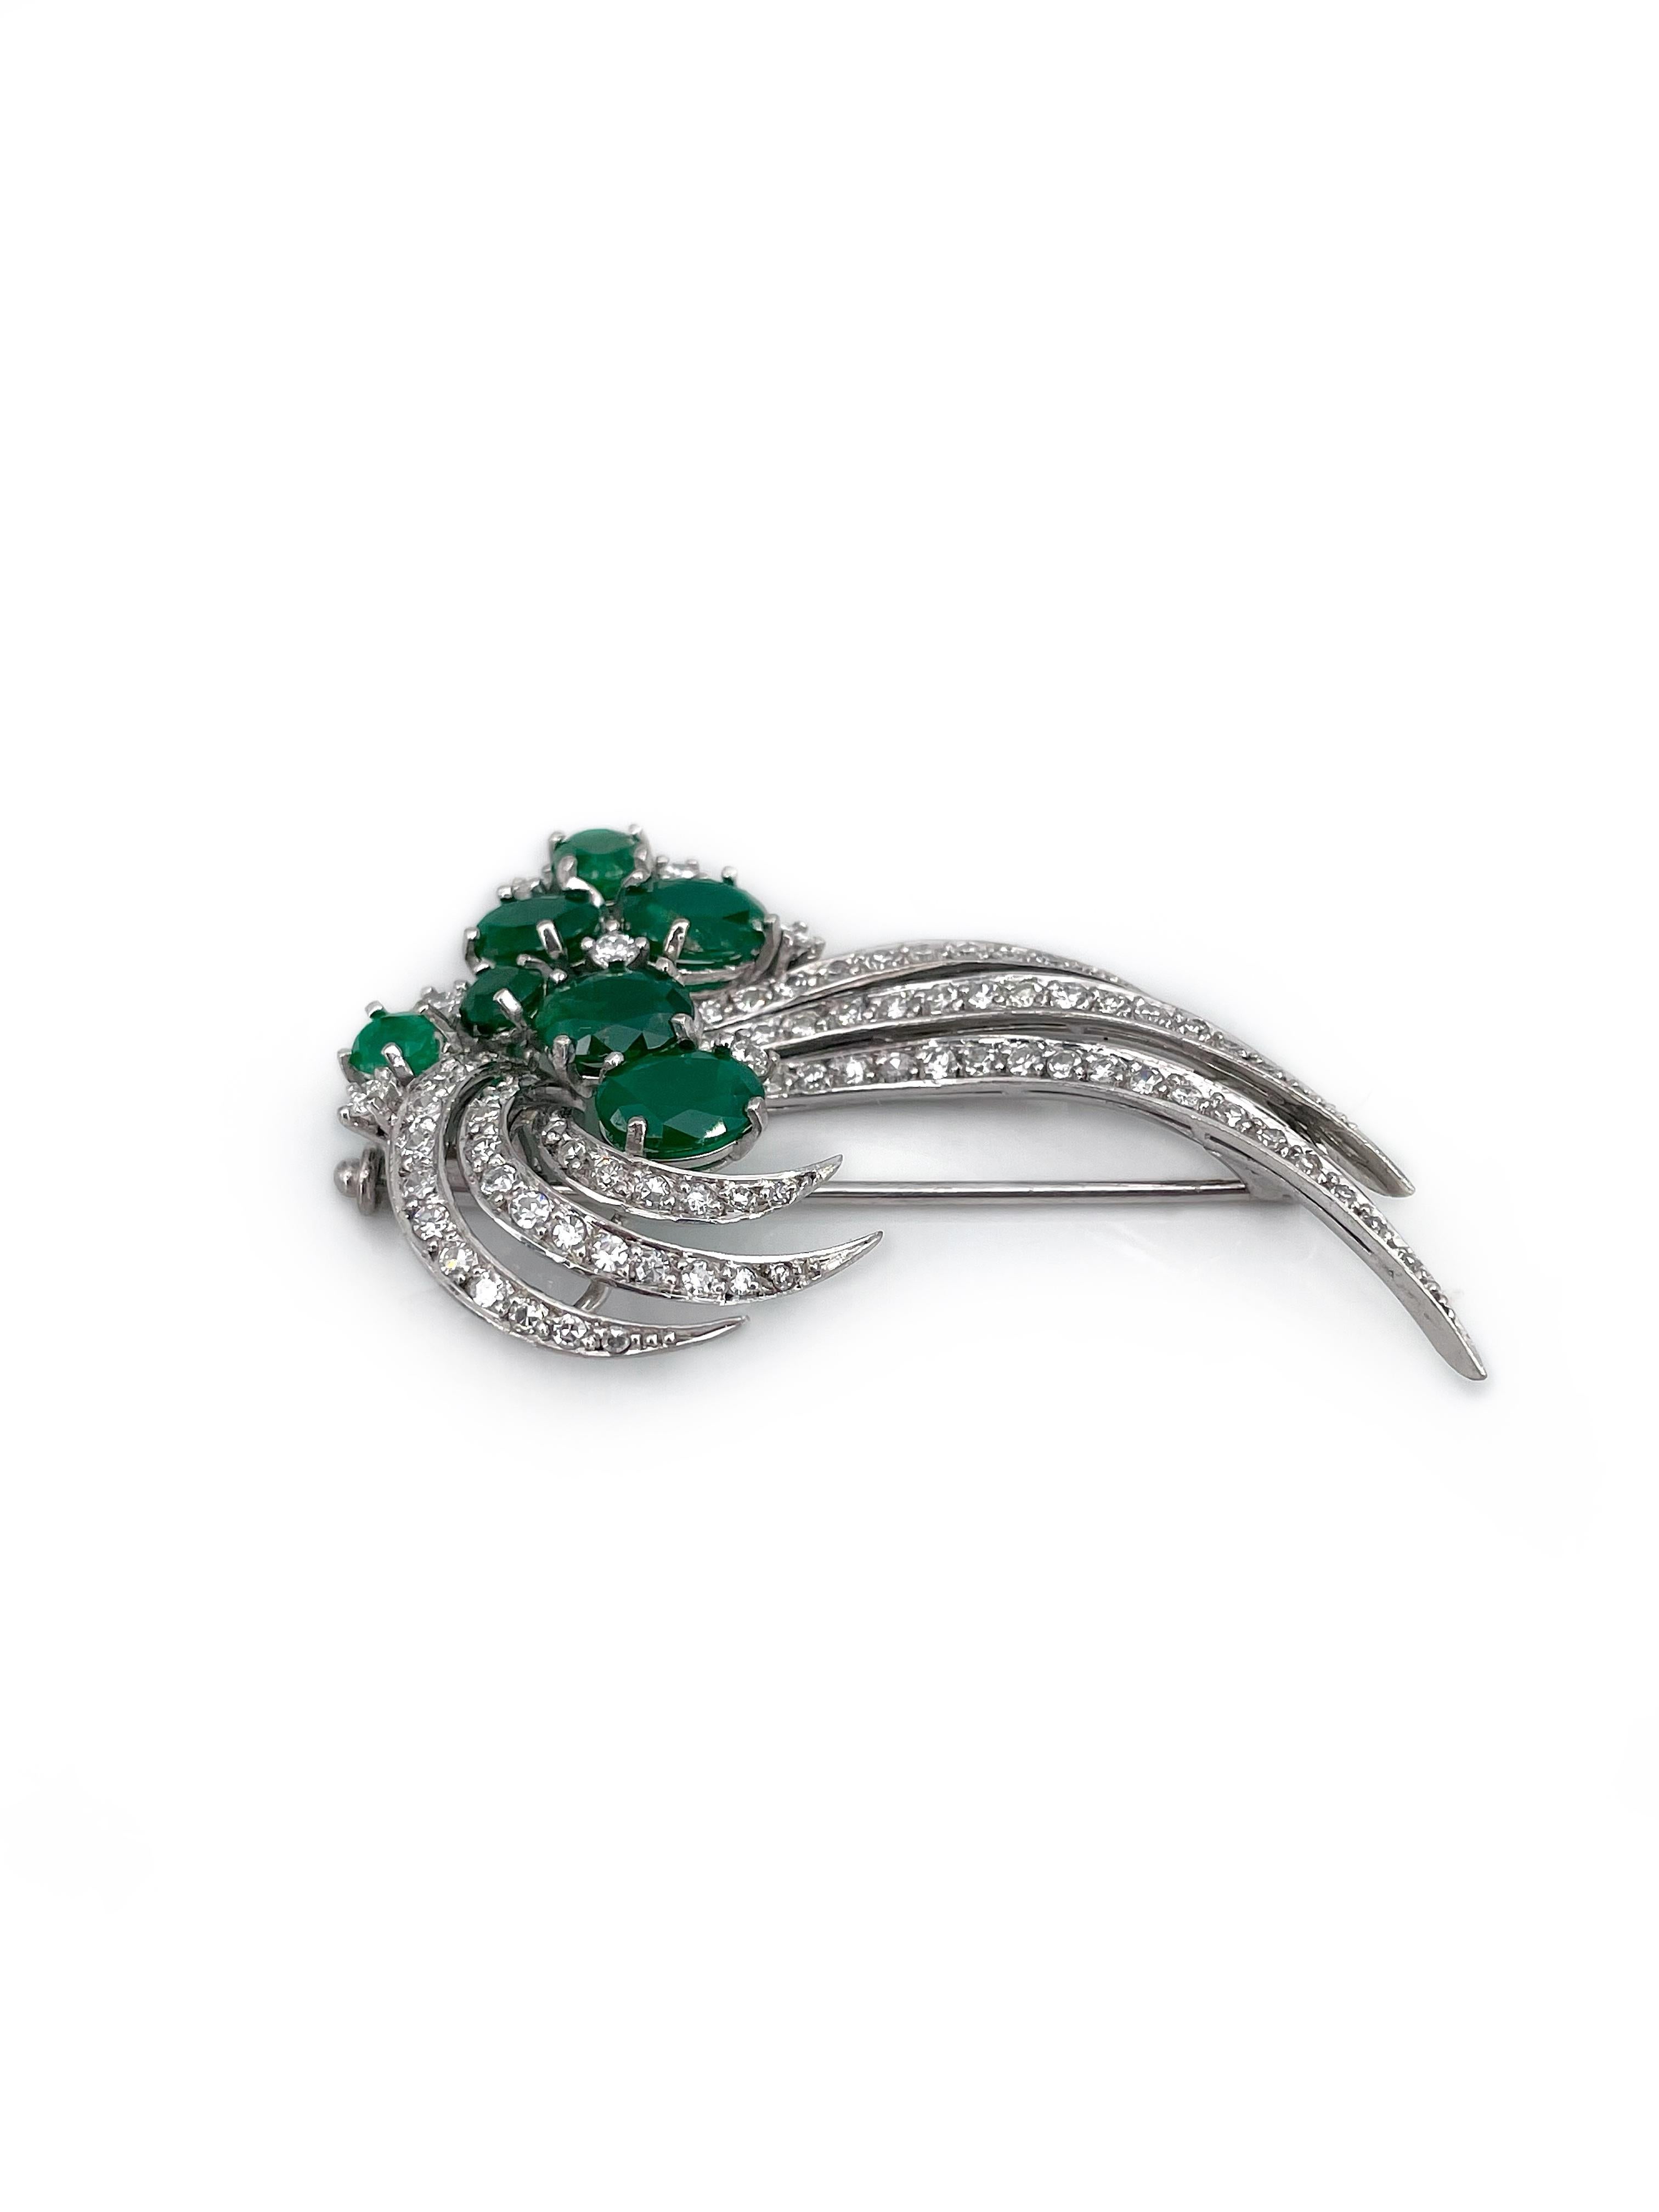 This is an elegant floral design pin brooch crafted in 18K white gold. The piece features 6 oval and 1 round shape rich green colour emeralds: TW 5.24ct, F. The gems are accompanied with 6 brilliant cut and 73 single cut diamonds: TW 1.365ct, W-STW,